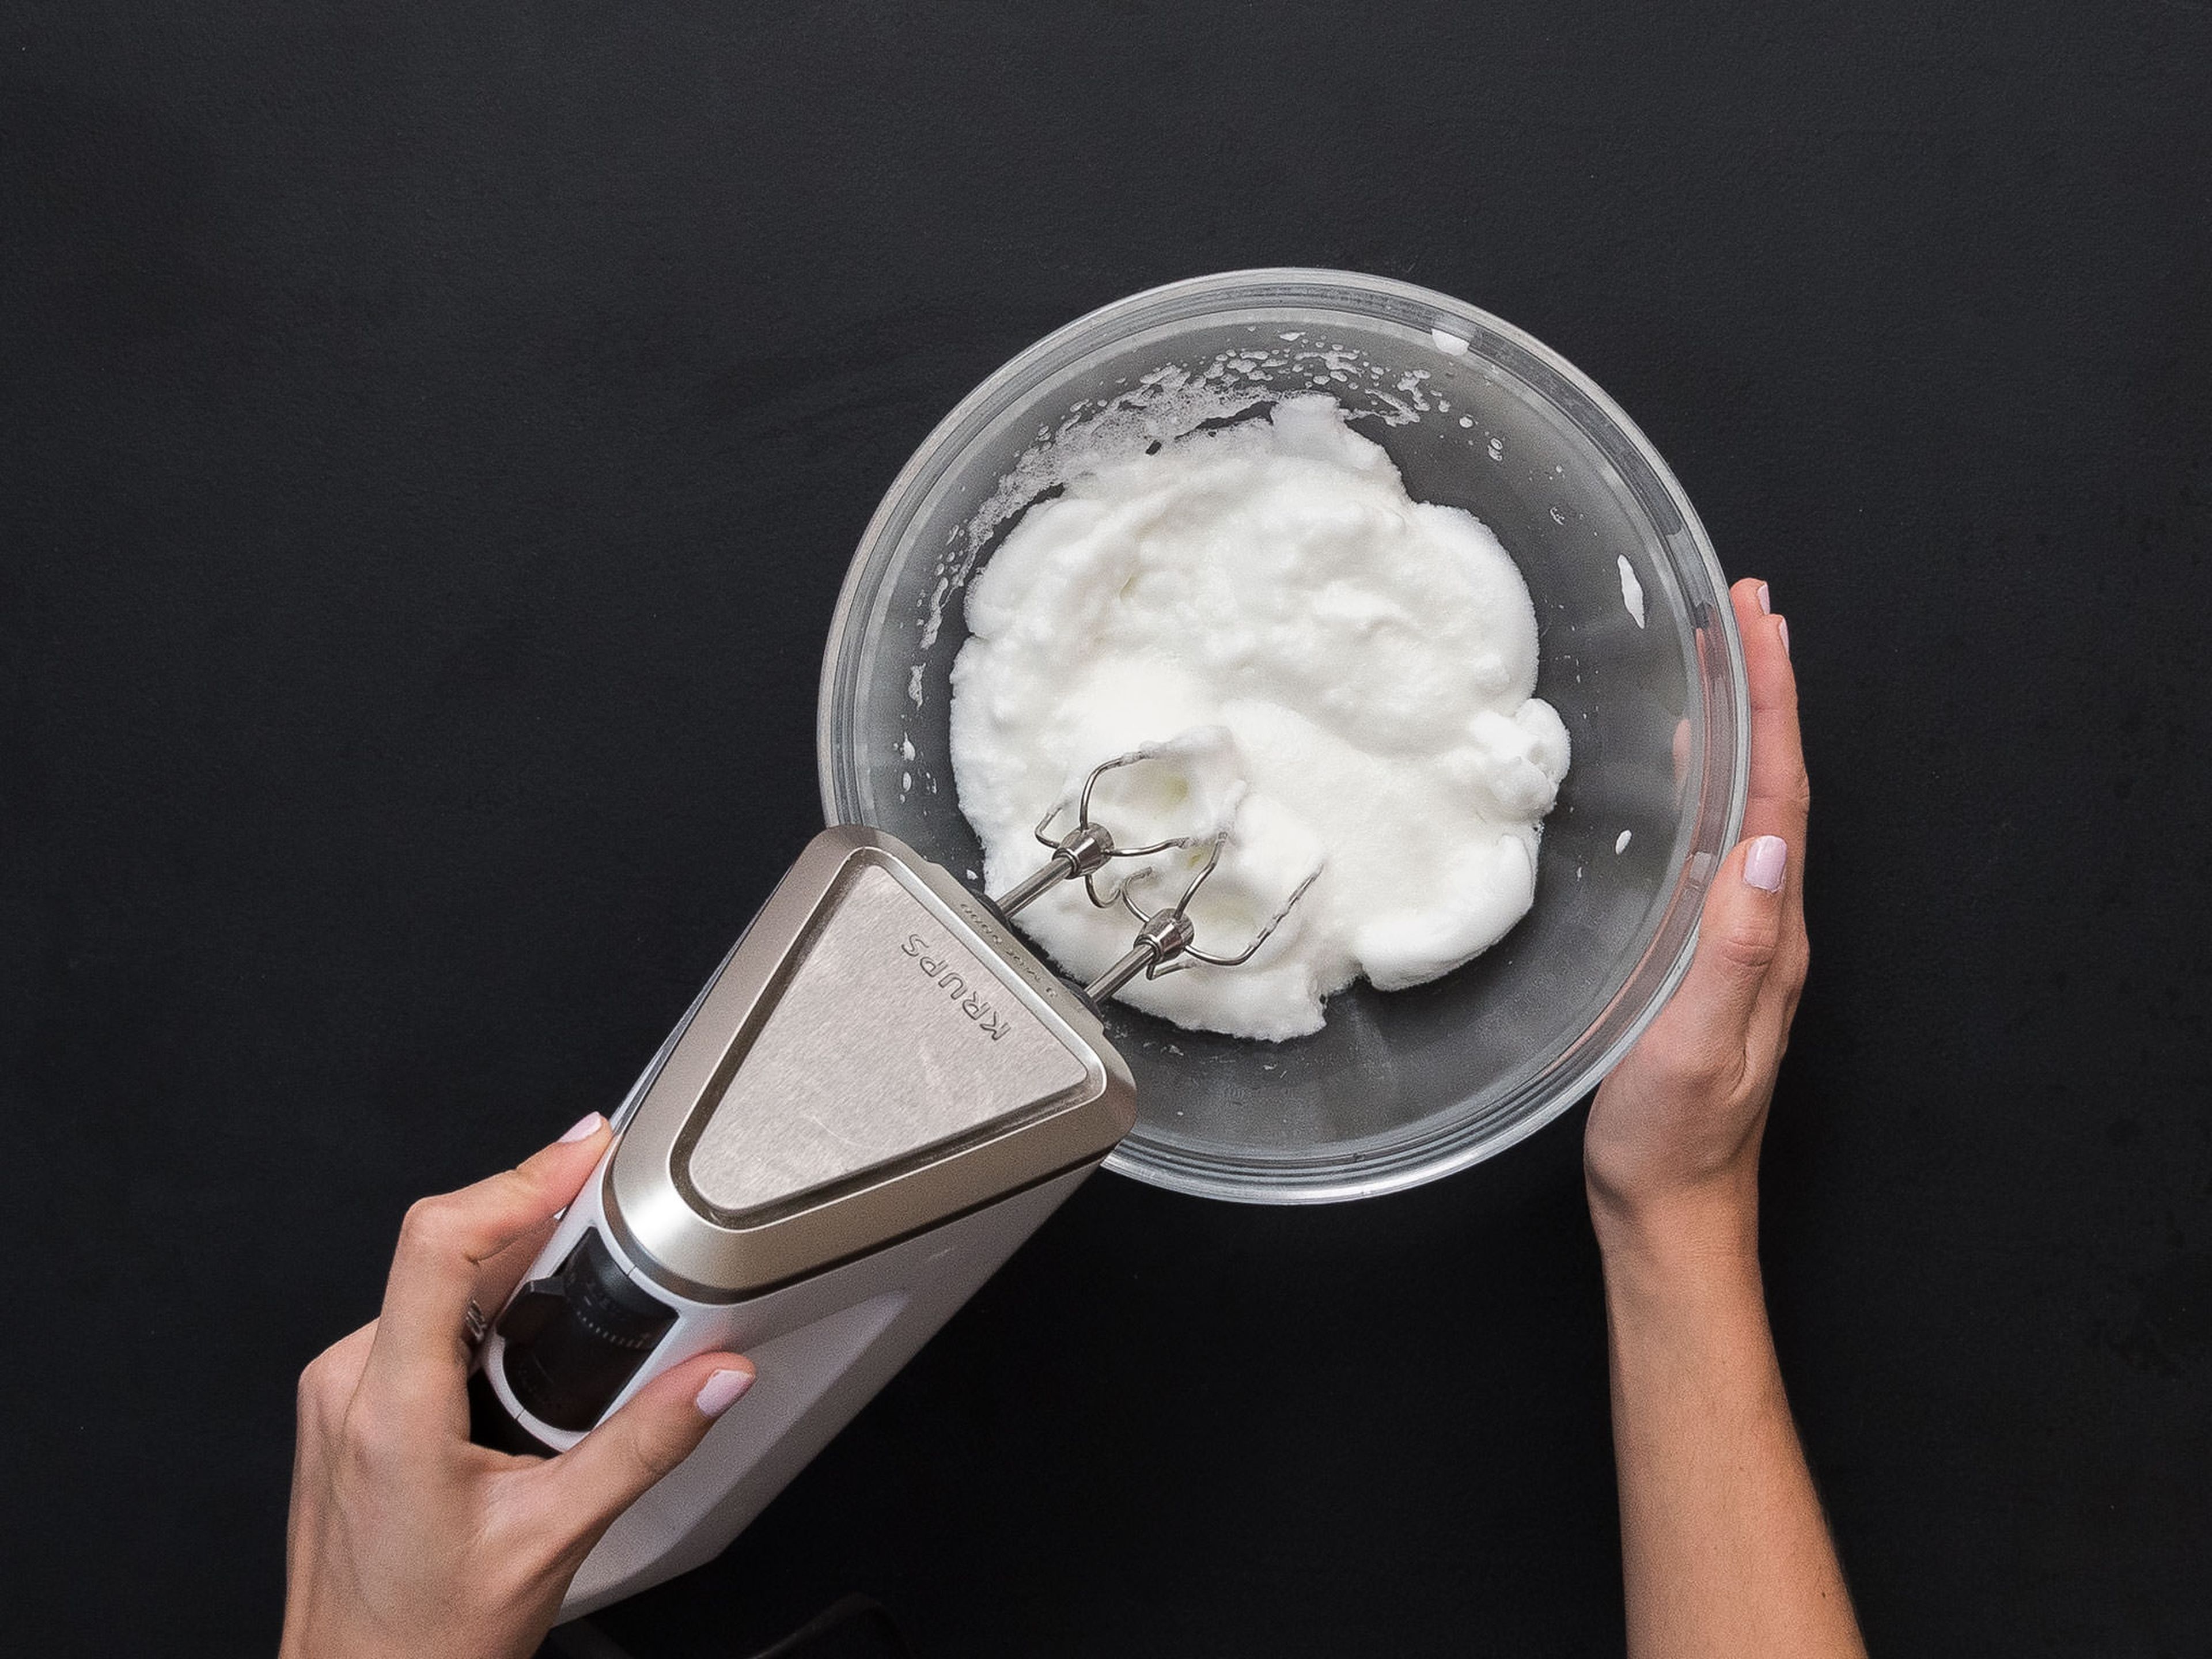 Beat egg whites with hand mixer until stiff peaks form.